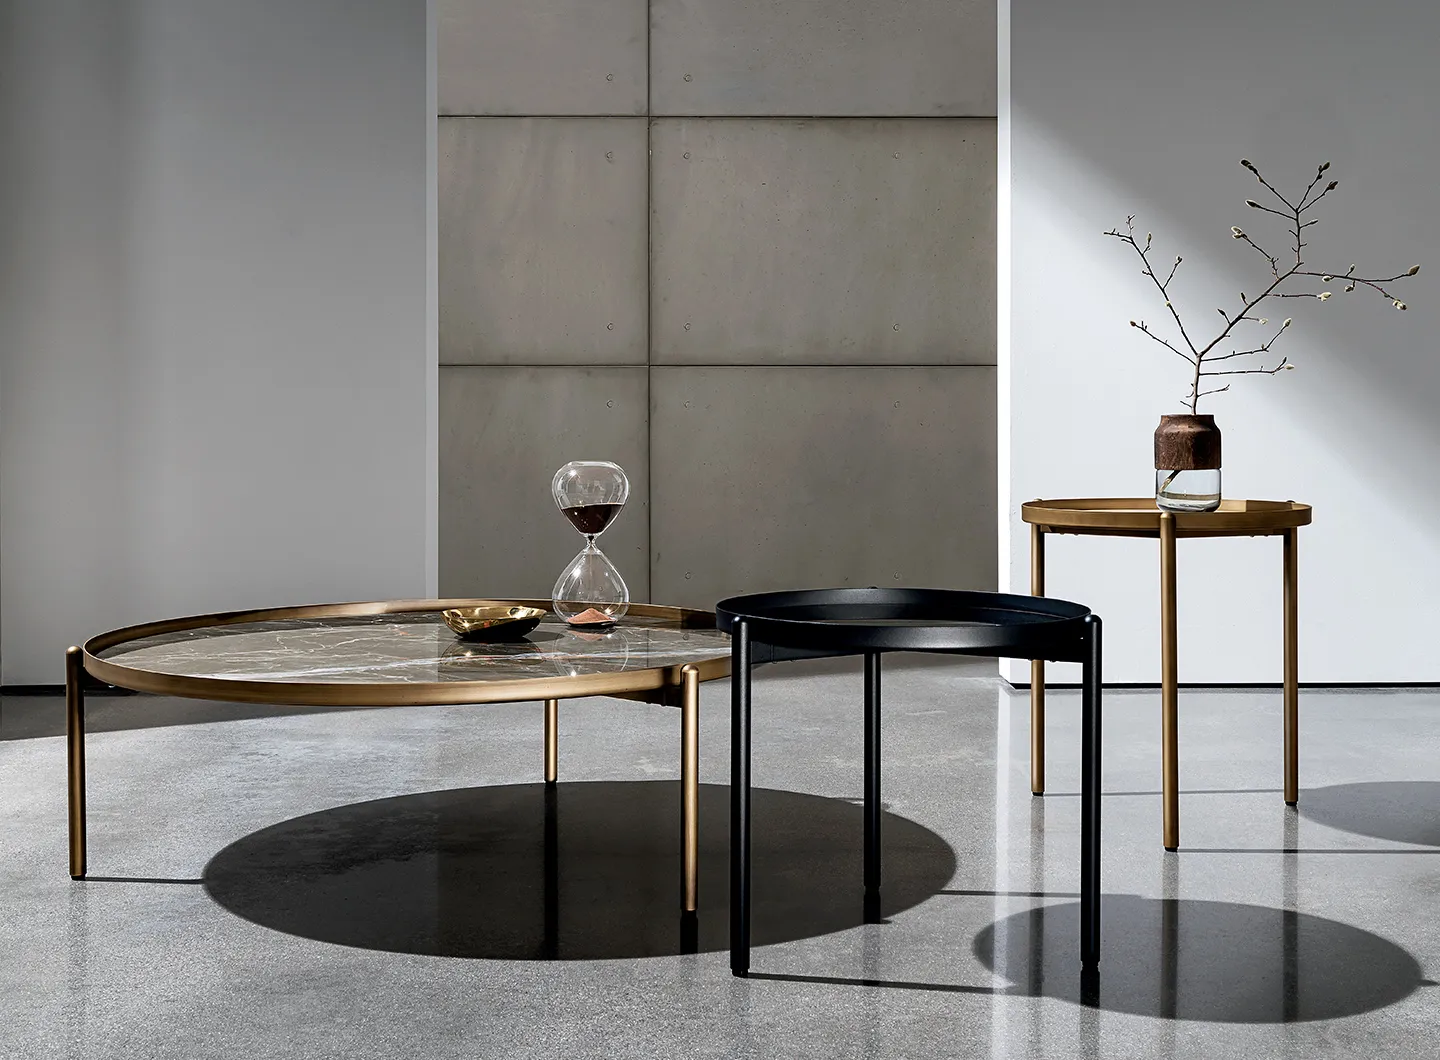 SOVET ITALIA Campos contemporary coffee table designed by Altherr Désile Park